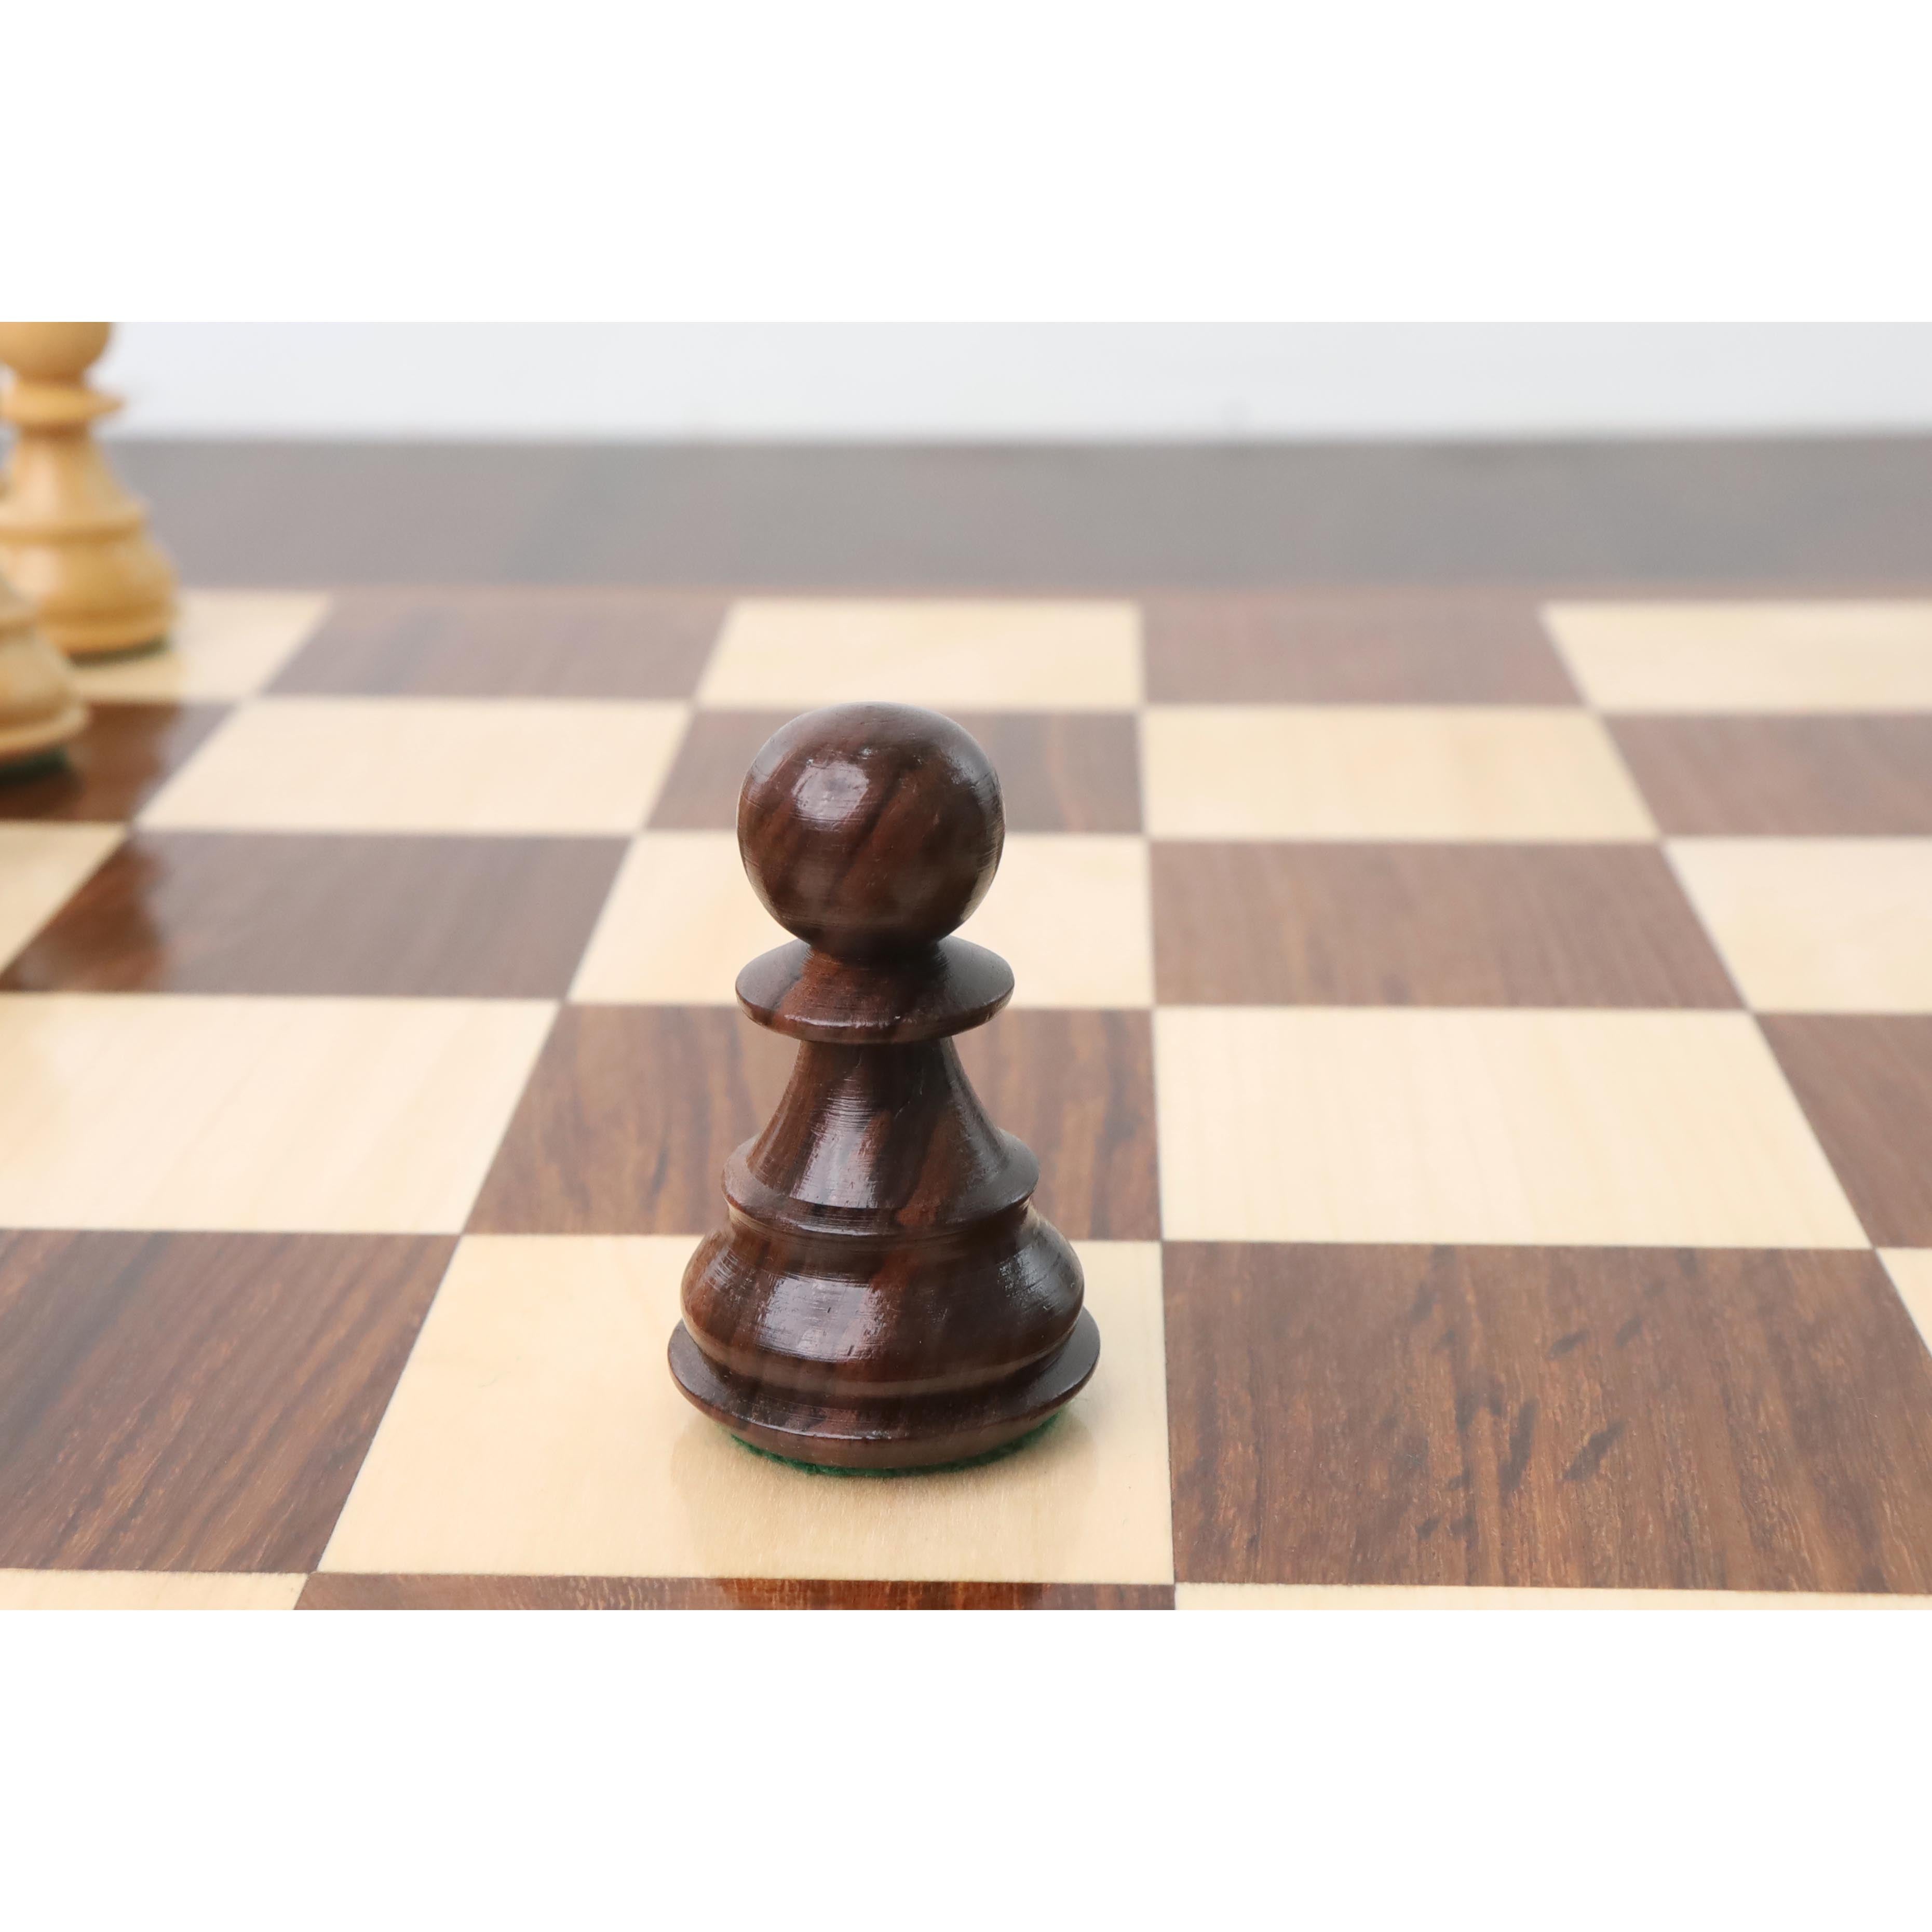 French Staunton Chess & Checkers Set – Wood Weighted Pieces, Brown